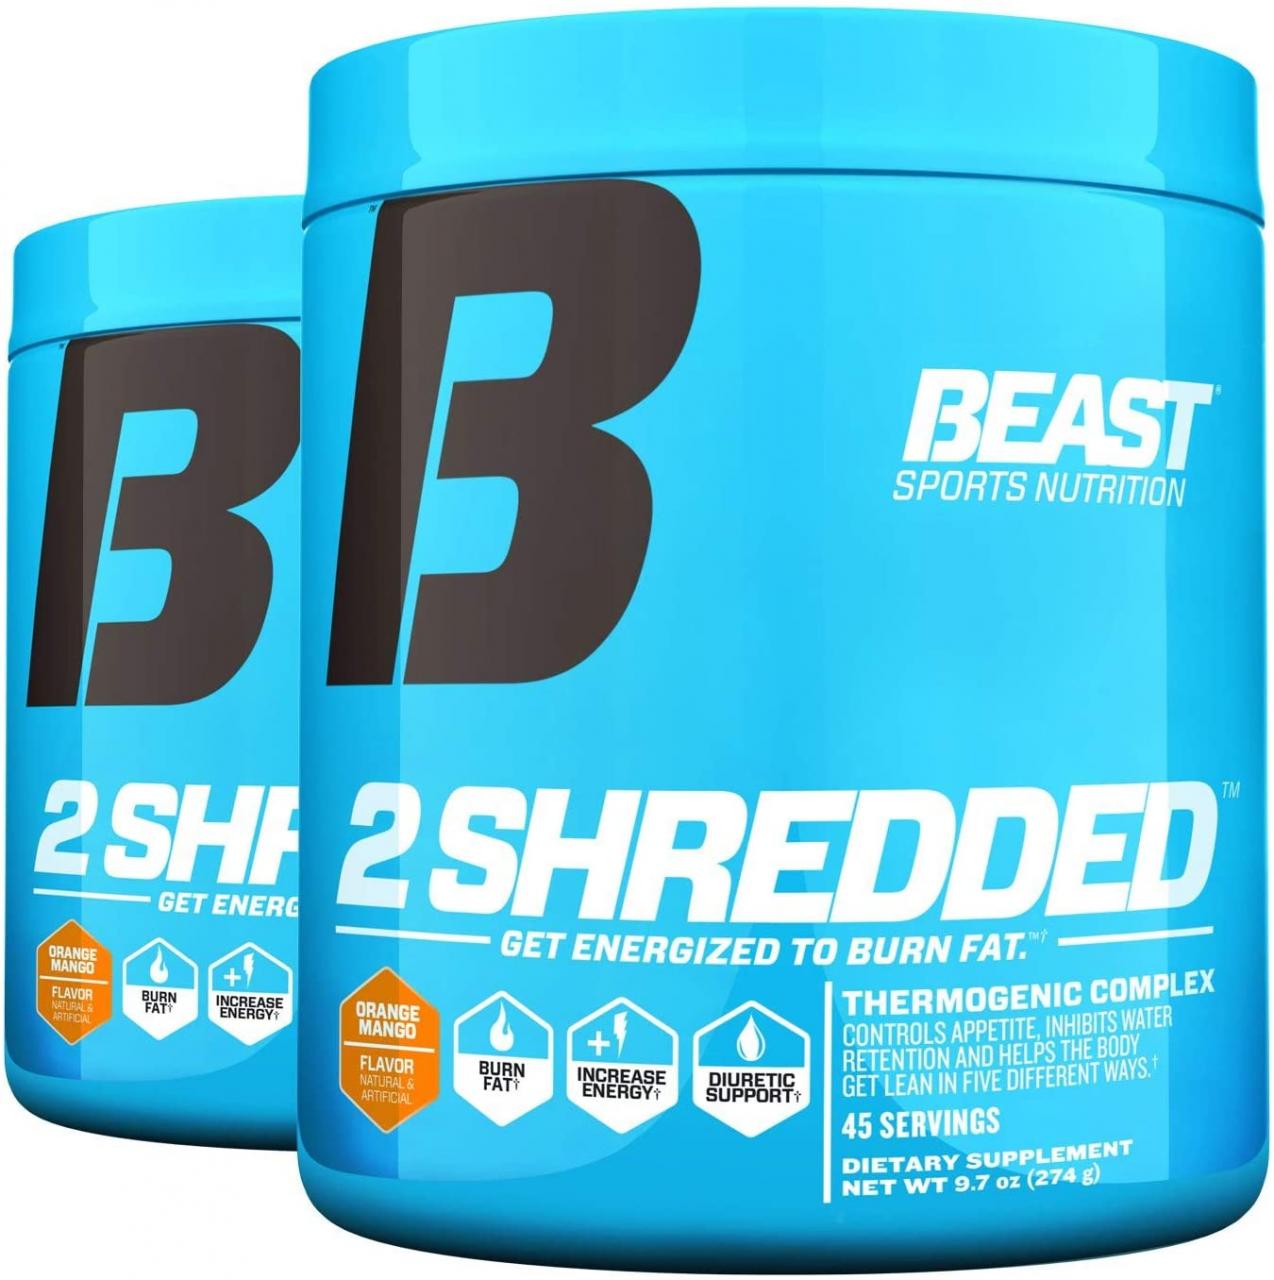 Amazon.com: Beast Sports Nutrition 2 Shredded: Thermogenic Powder, Metabolism Booster, and Appetite Suppressant | Best Fat Burner for Weight Loss and Reduced Water Retention, Orange Mango, 45 Servings, 2 Pack: Health &amp; Personal Care